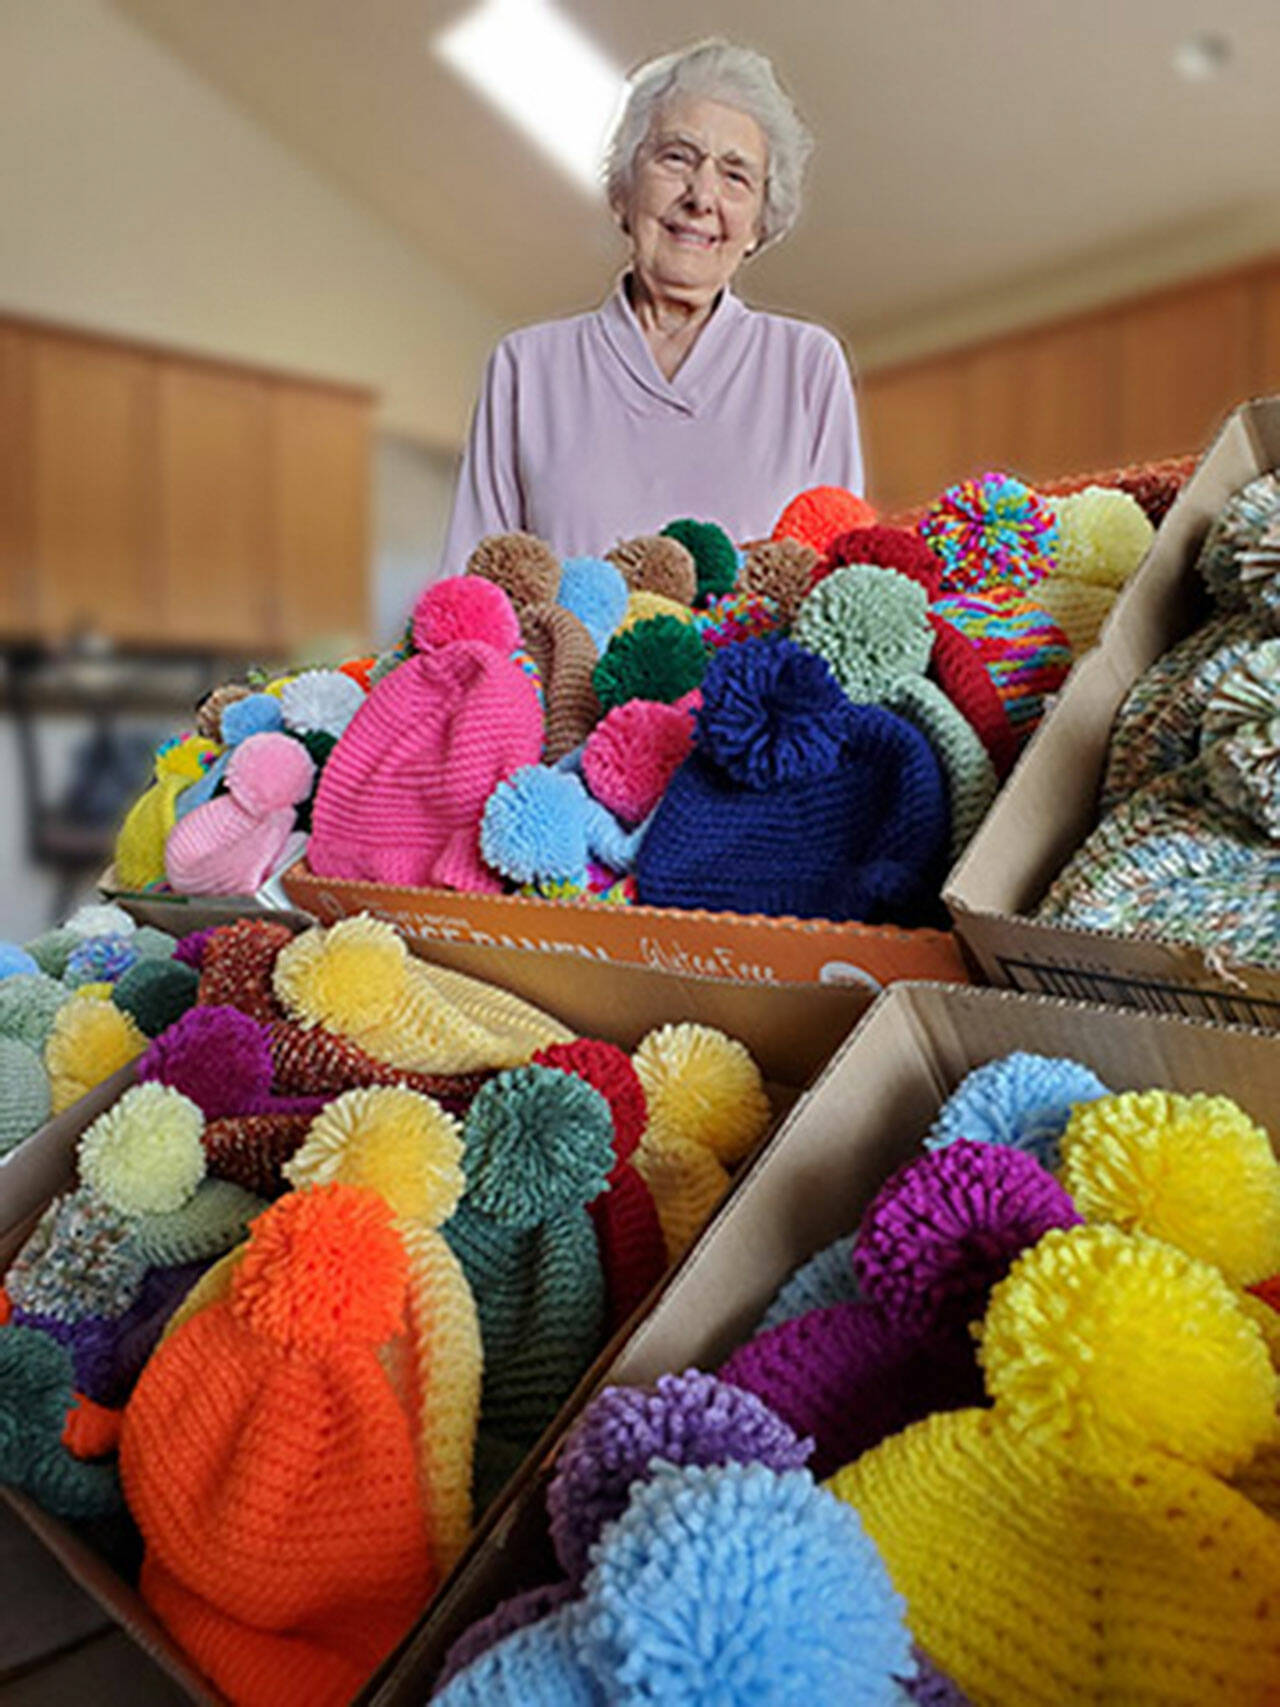 Twila Guengerich, Sequim, has crocheted more than 100 warm caps this year to be delivered to needy children around the world by Operation Christmas Child. Submitted photo